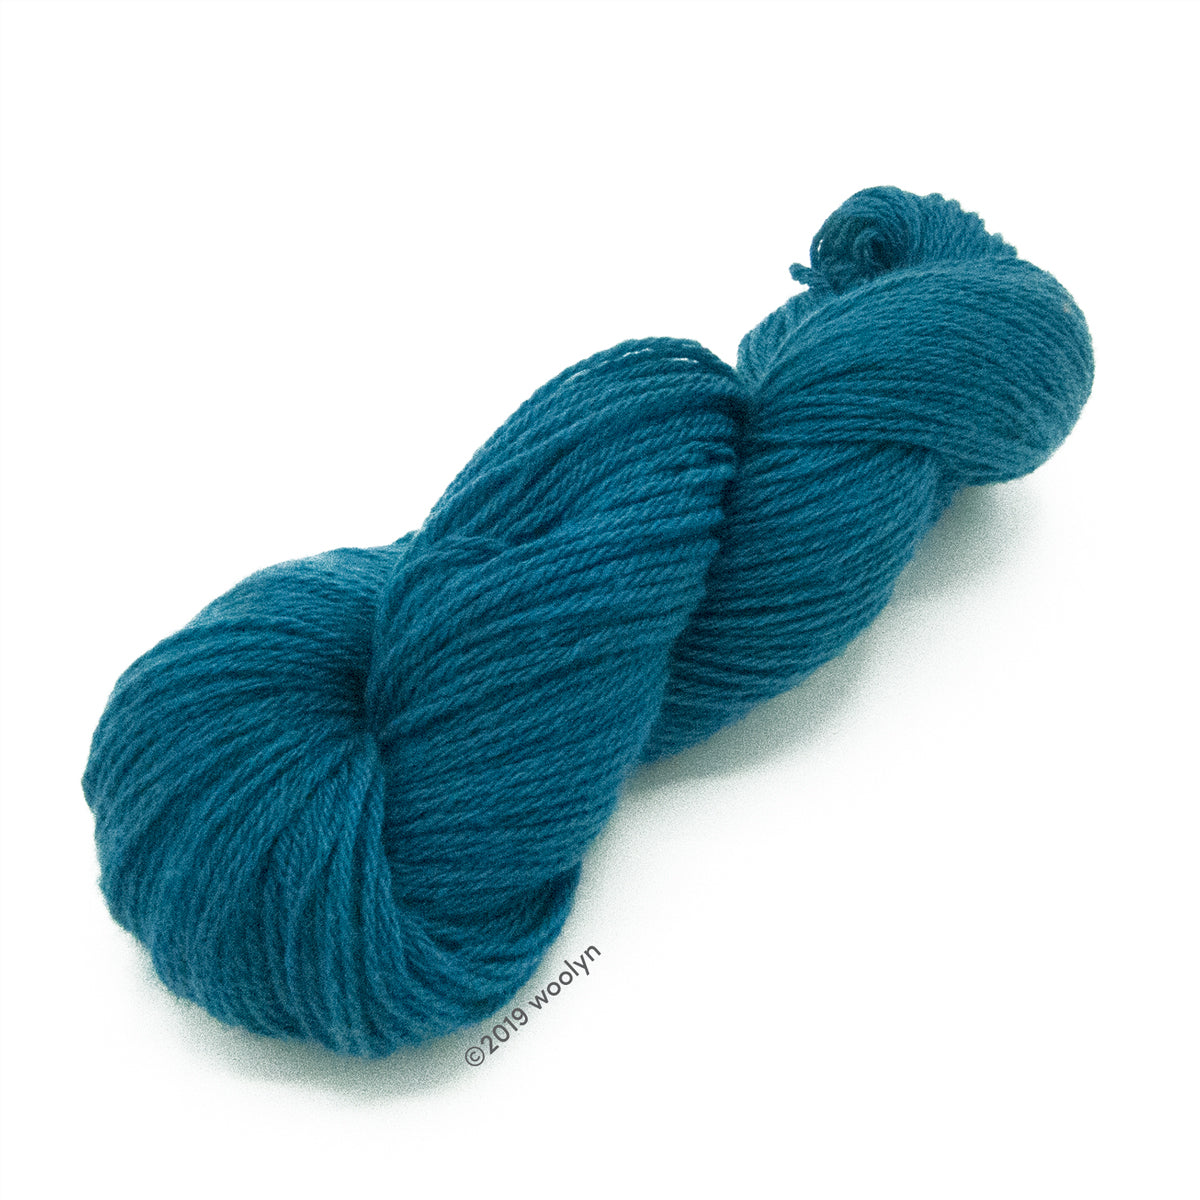 North Light Fibers Spring St in Teal Inlet, a deep teal color.